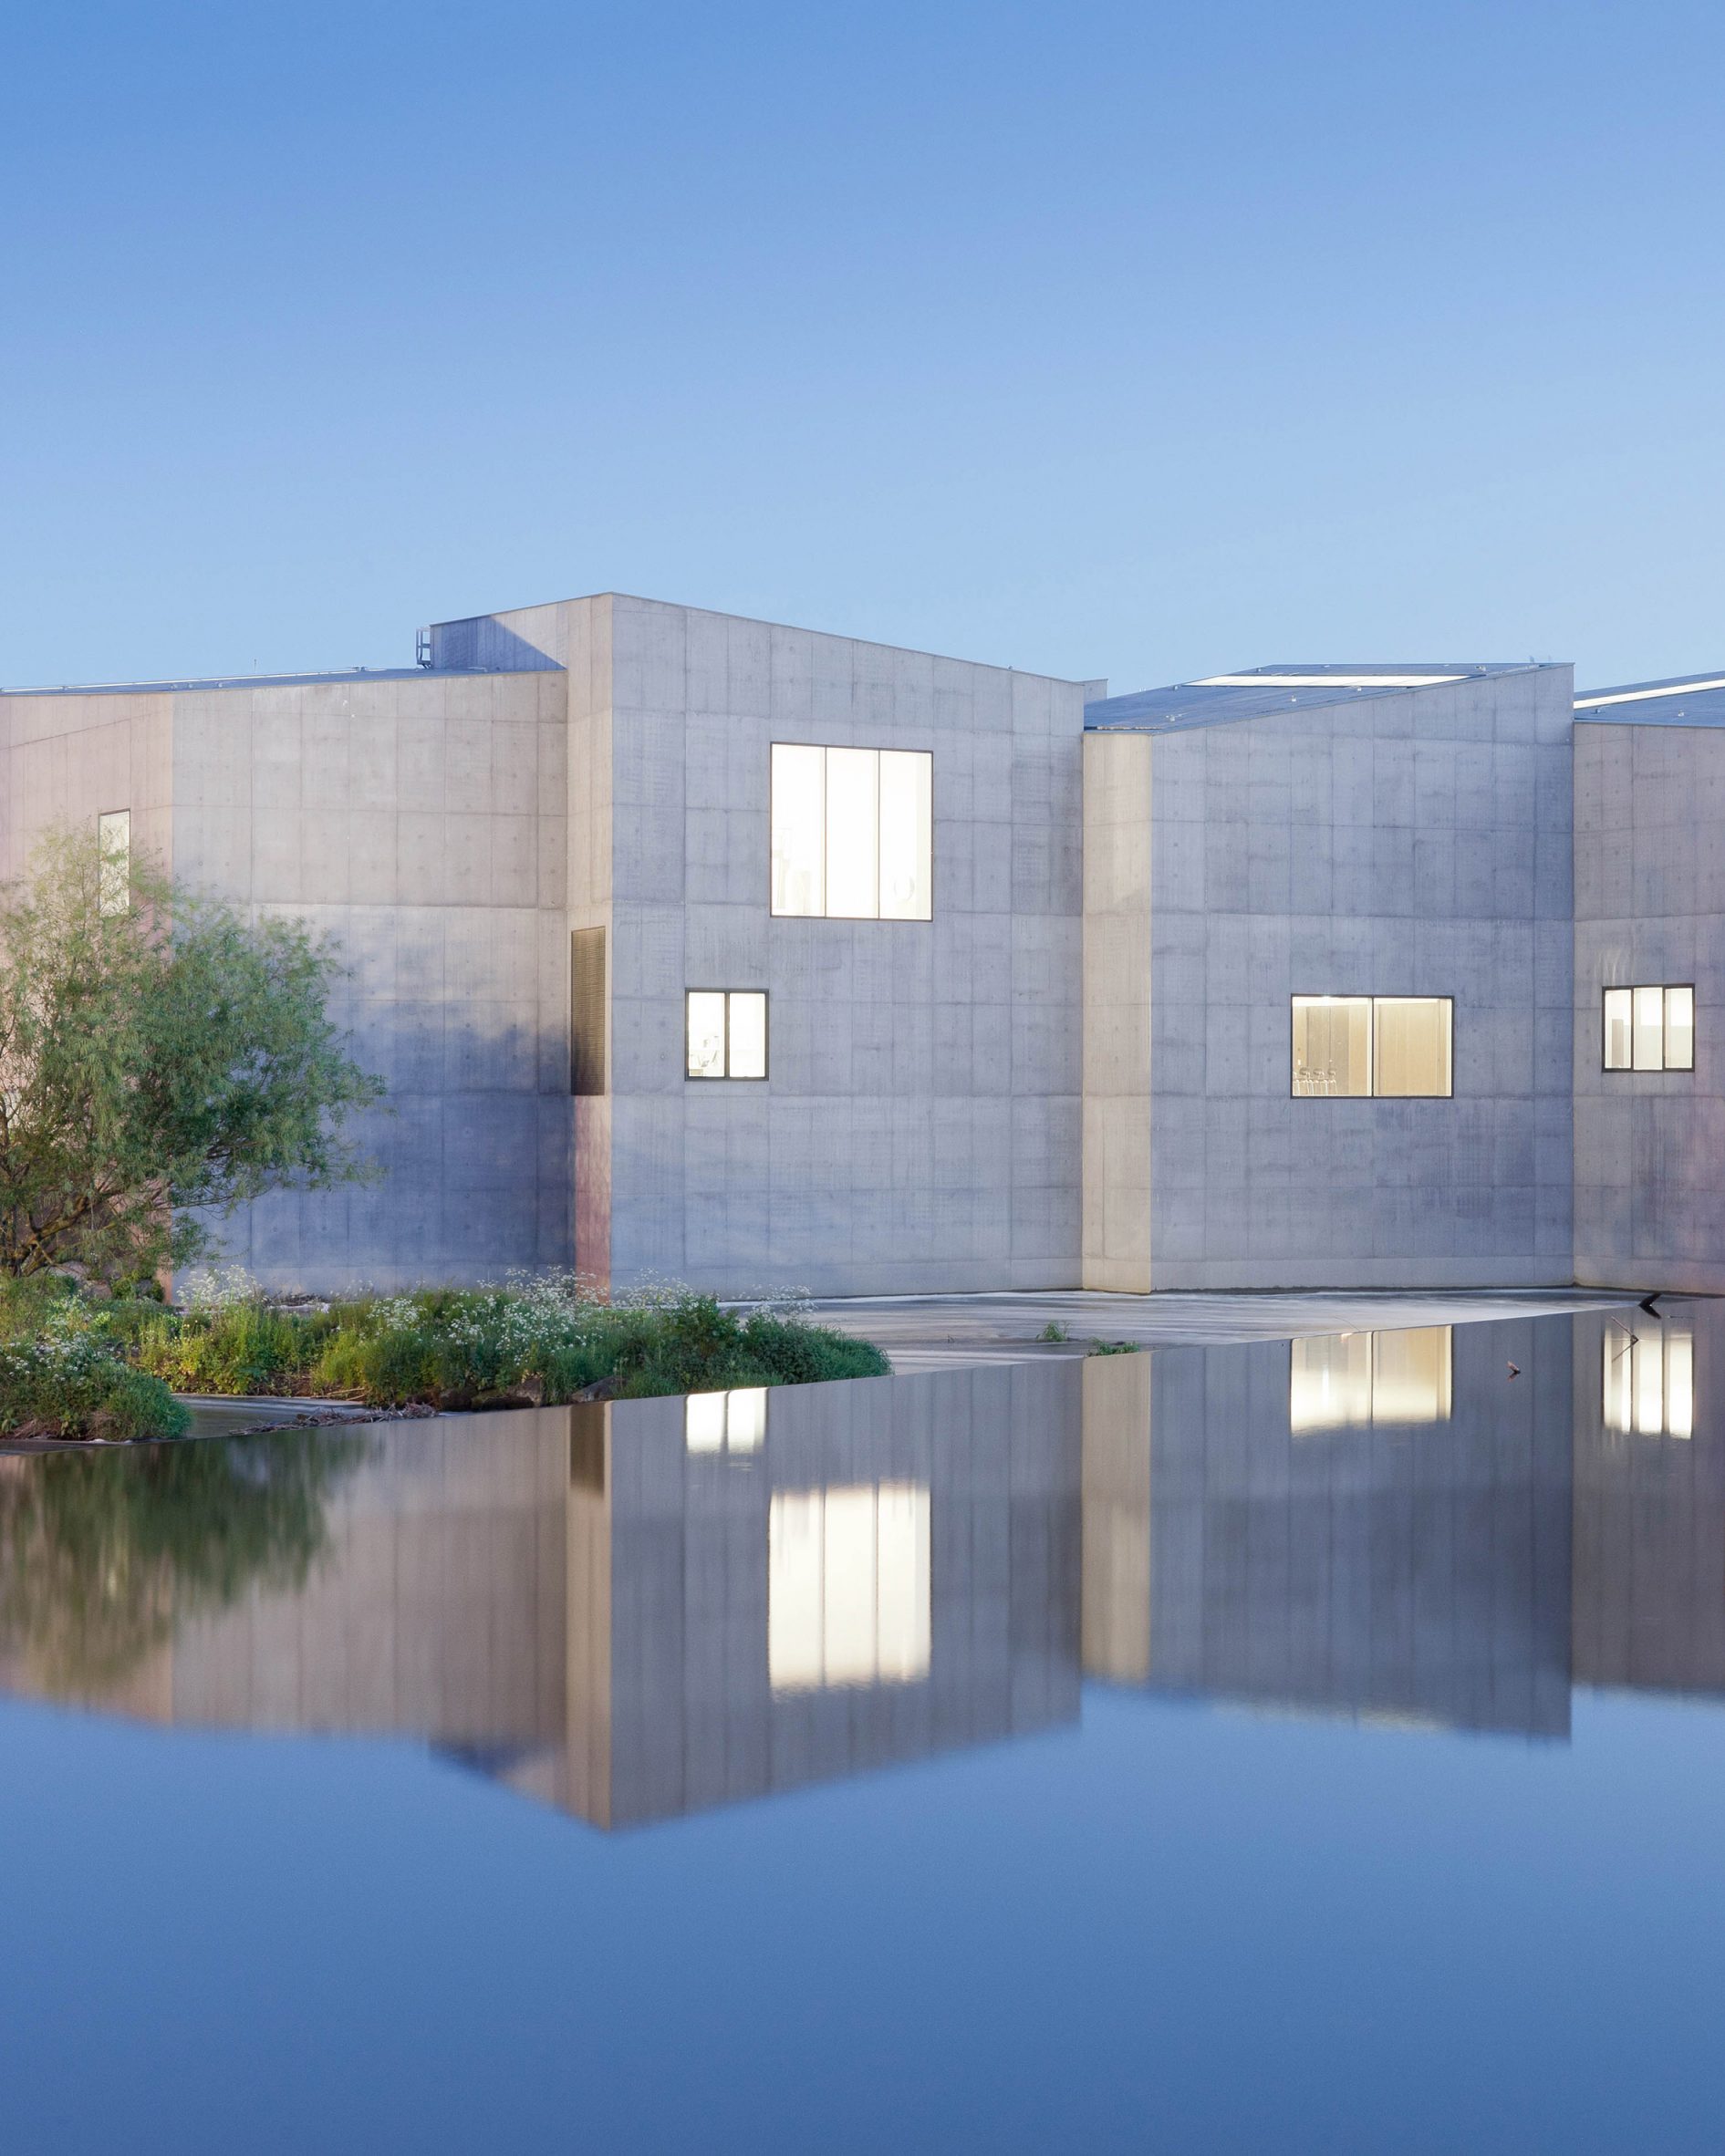 The Hepworth Wakefield by David Chipperfield